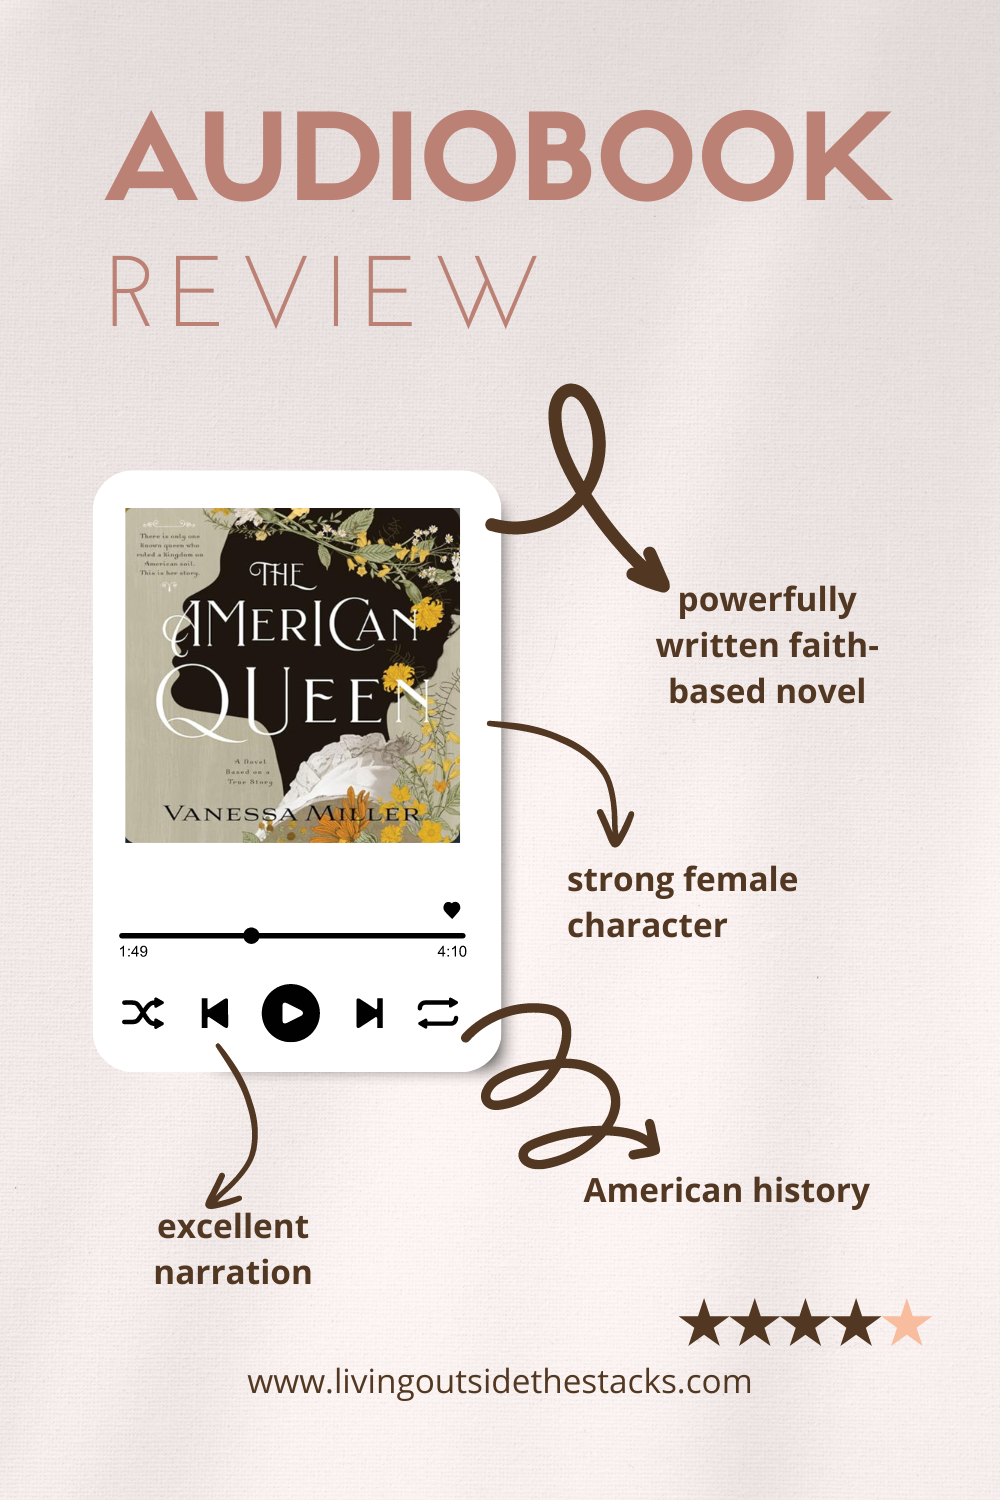 Audiobook Review The American Queen Pinterest 3 {living outside the stacks} #BookReview #NetGalley #TheAmericanQueen #VanessaMiller